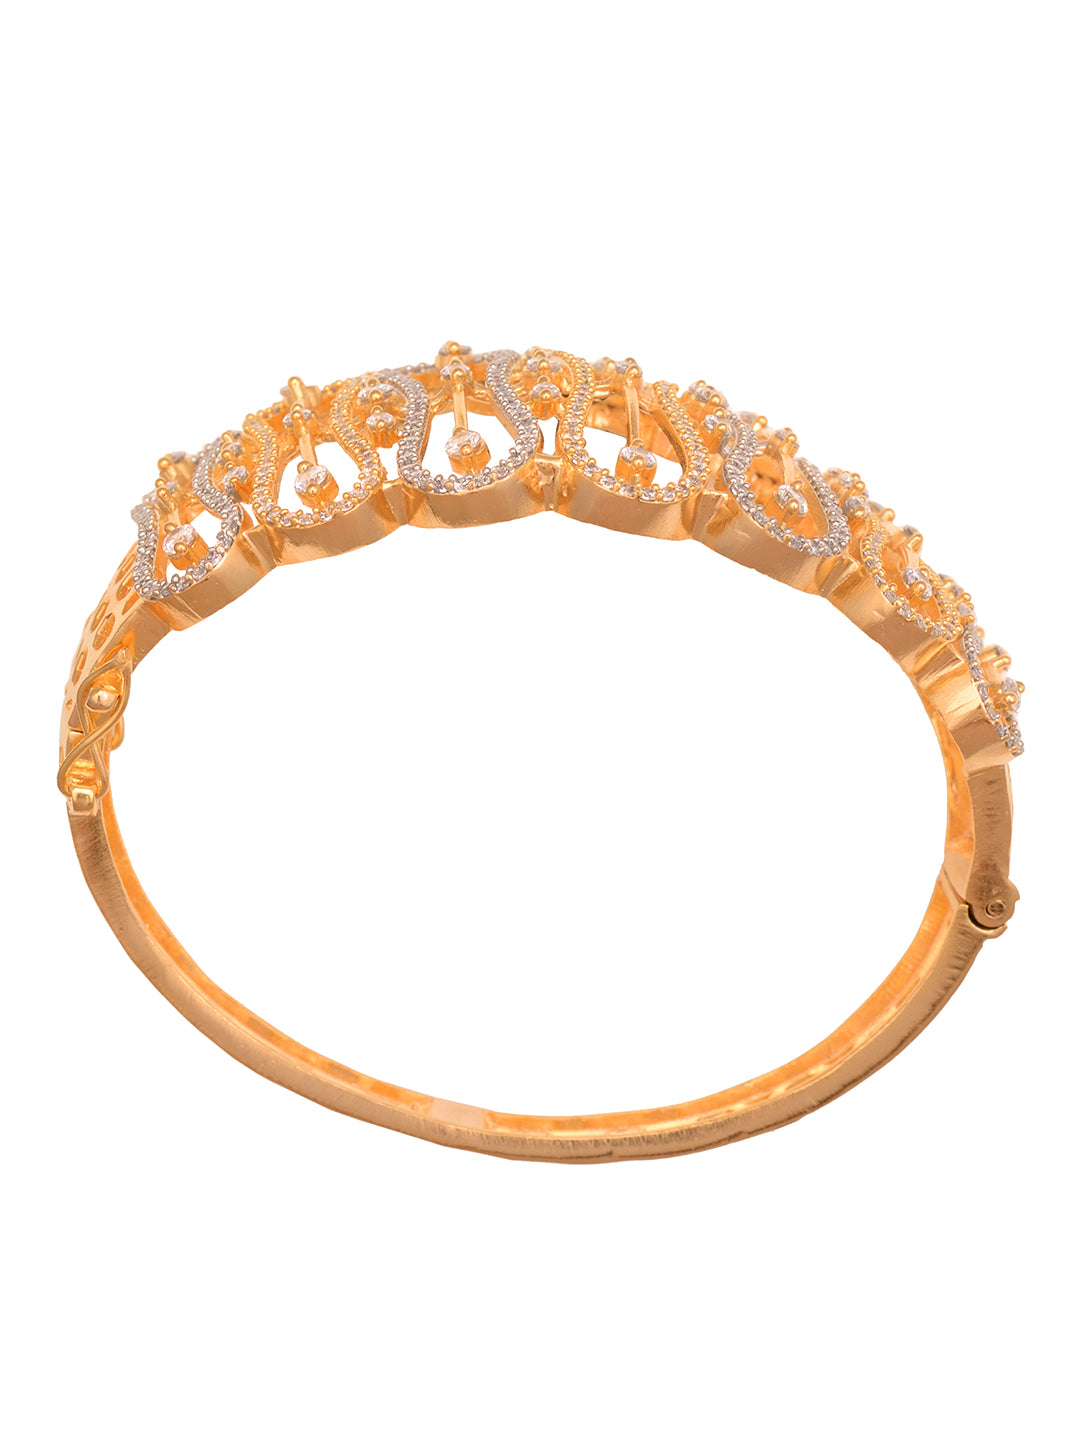 Gold Toned AD Studded Luxe Handcrafted Bracelet, zaveri pearls, sale price rs, sale price, sale gold plated, sale gold, sale, rubans, ring, regular price, priyassi jewellery, kushal's - Saraf